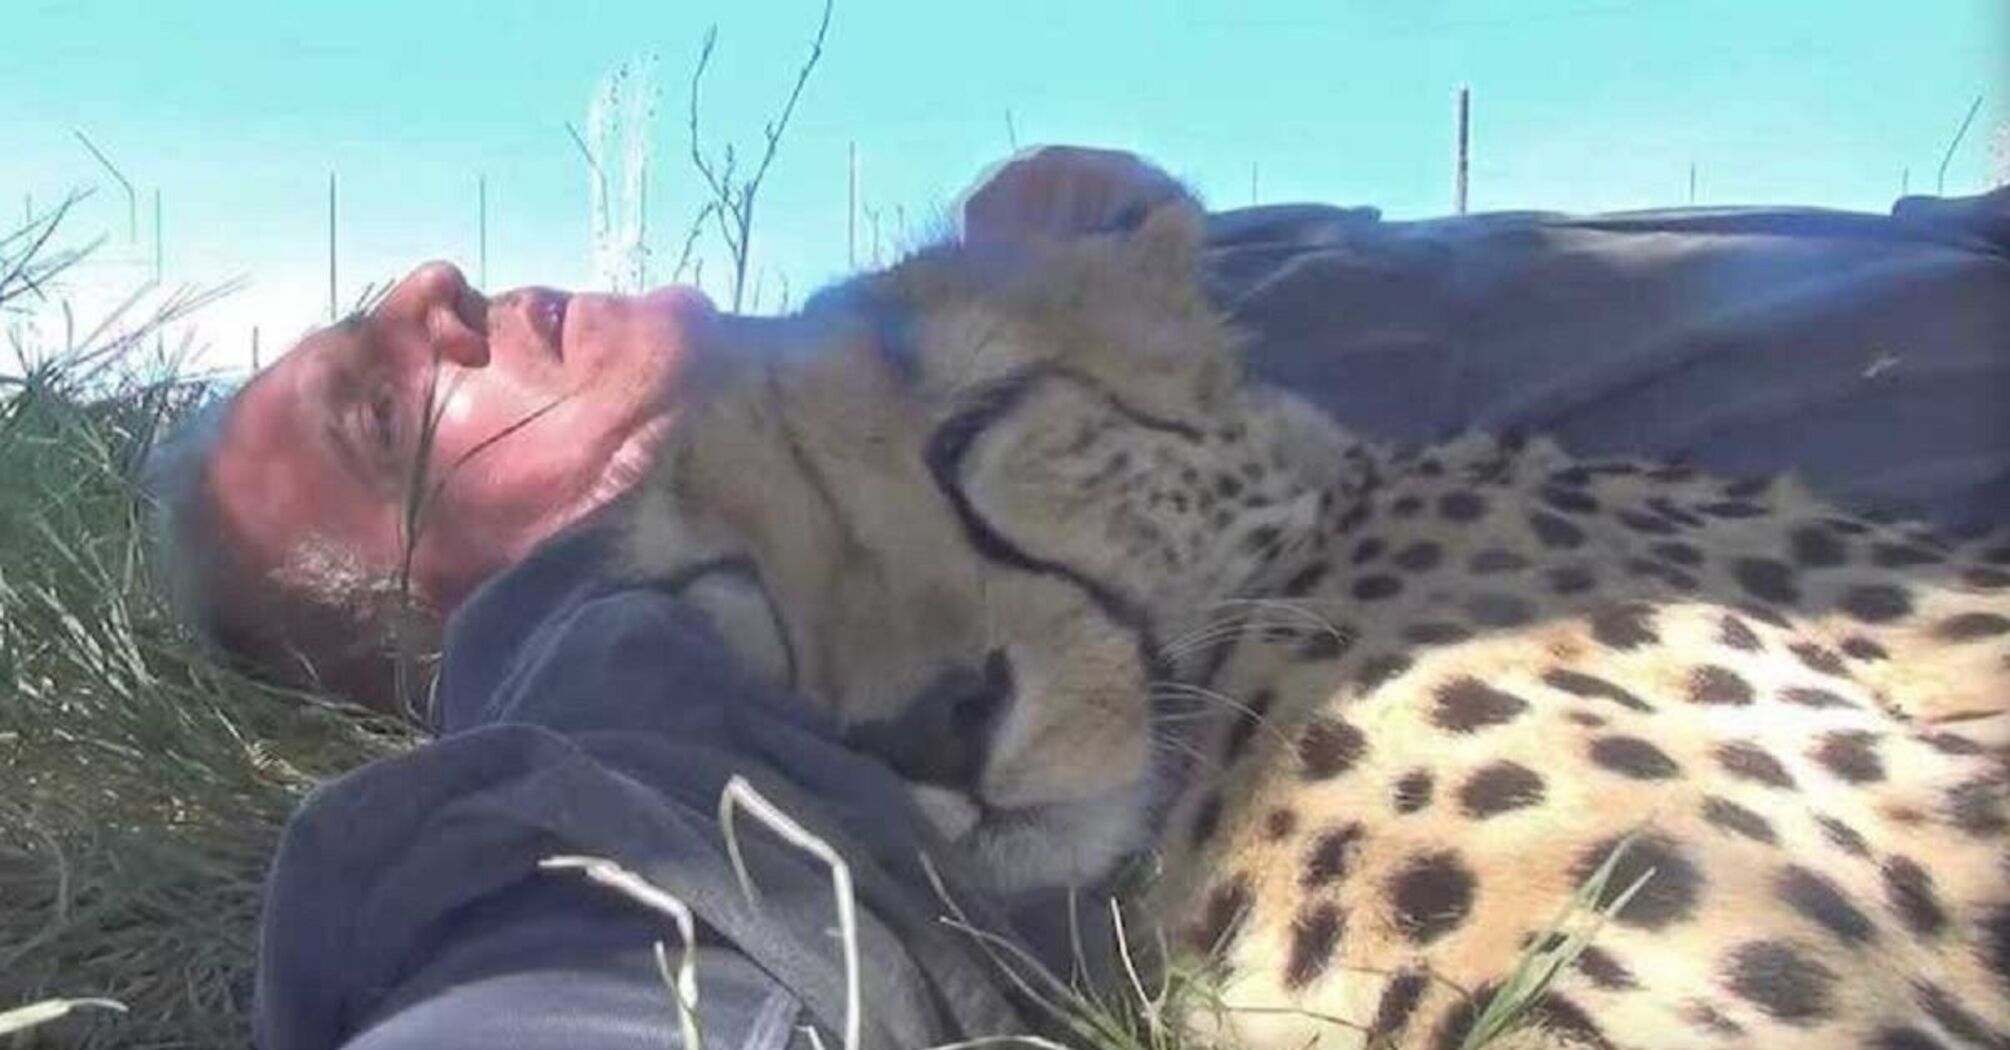 The shocked wildlife photographer woke up under a tree in the arms of a cheetah